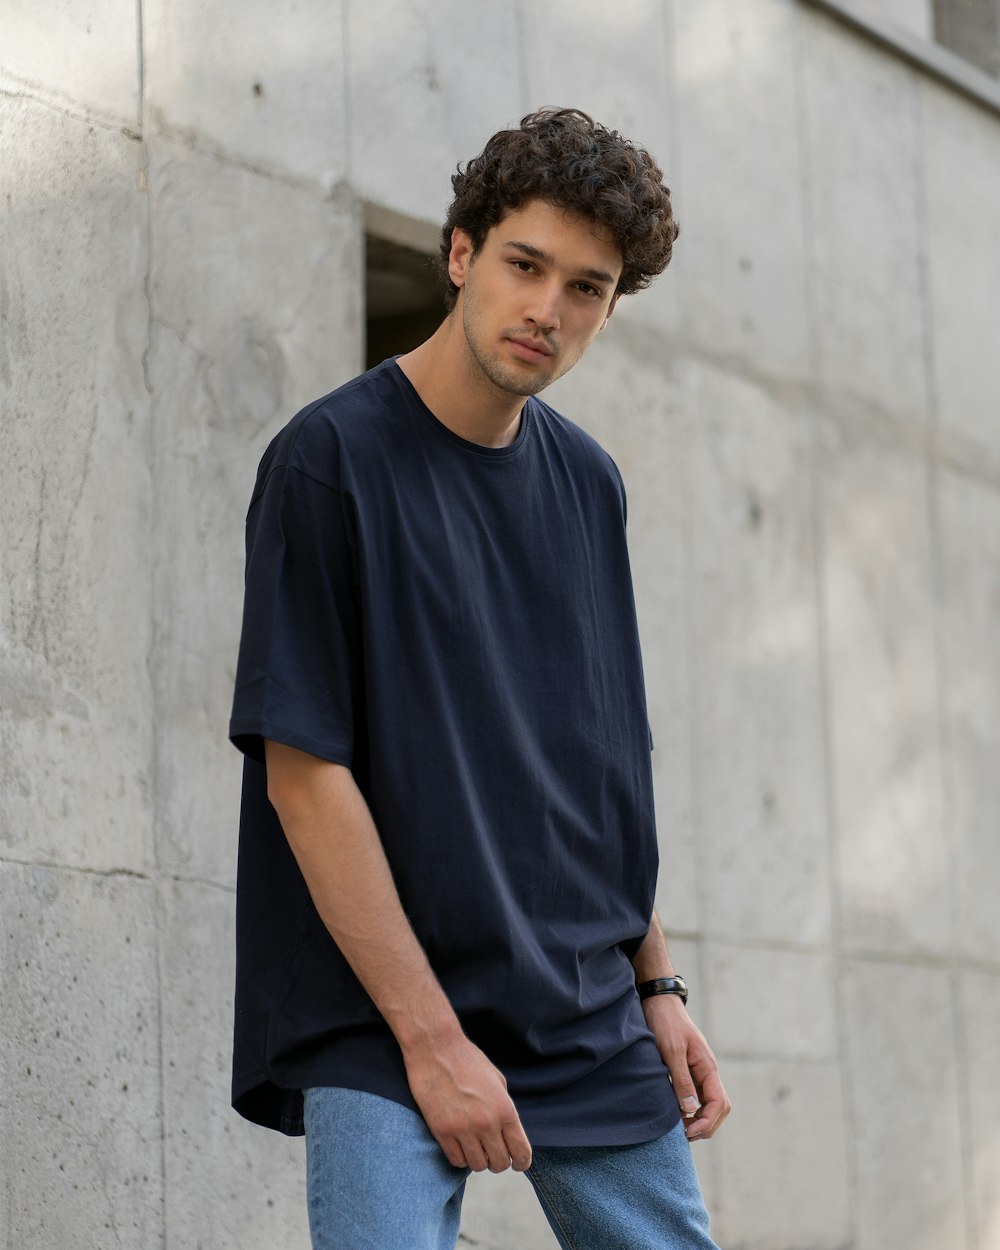 a man in a black t - shirt and blue jeans is leaning against a wall